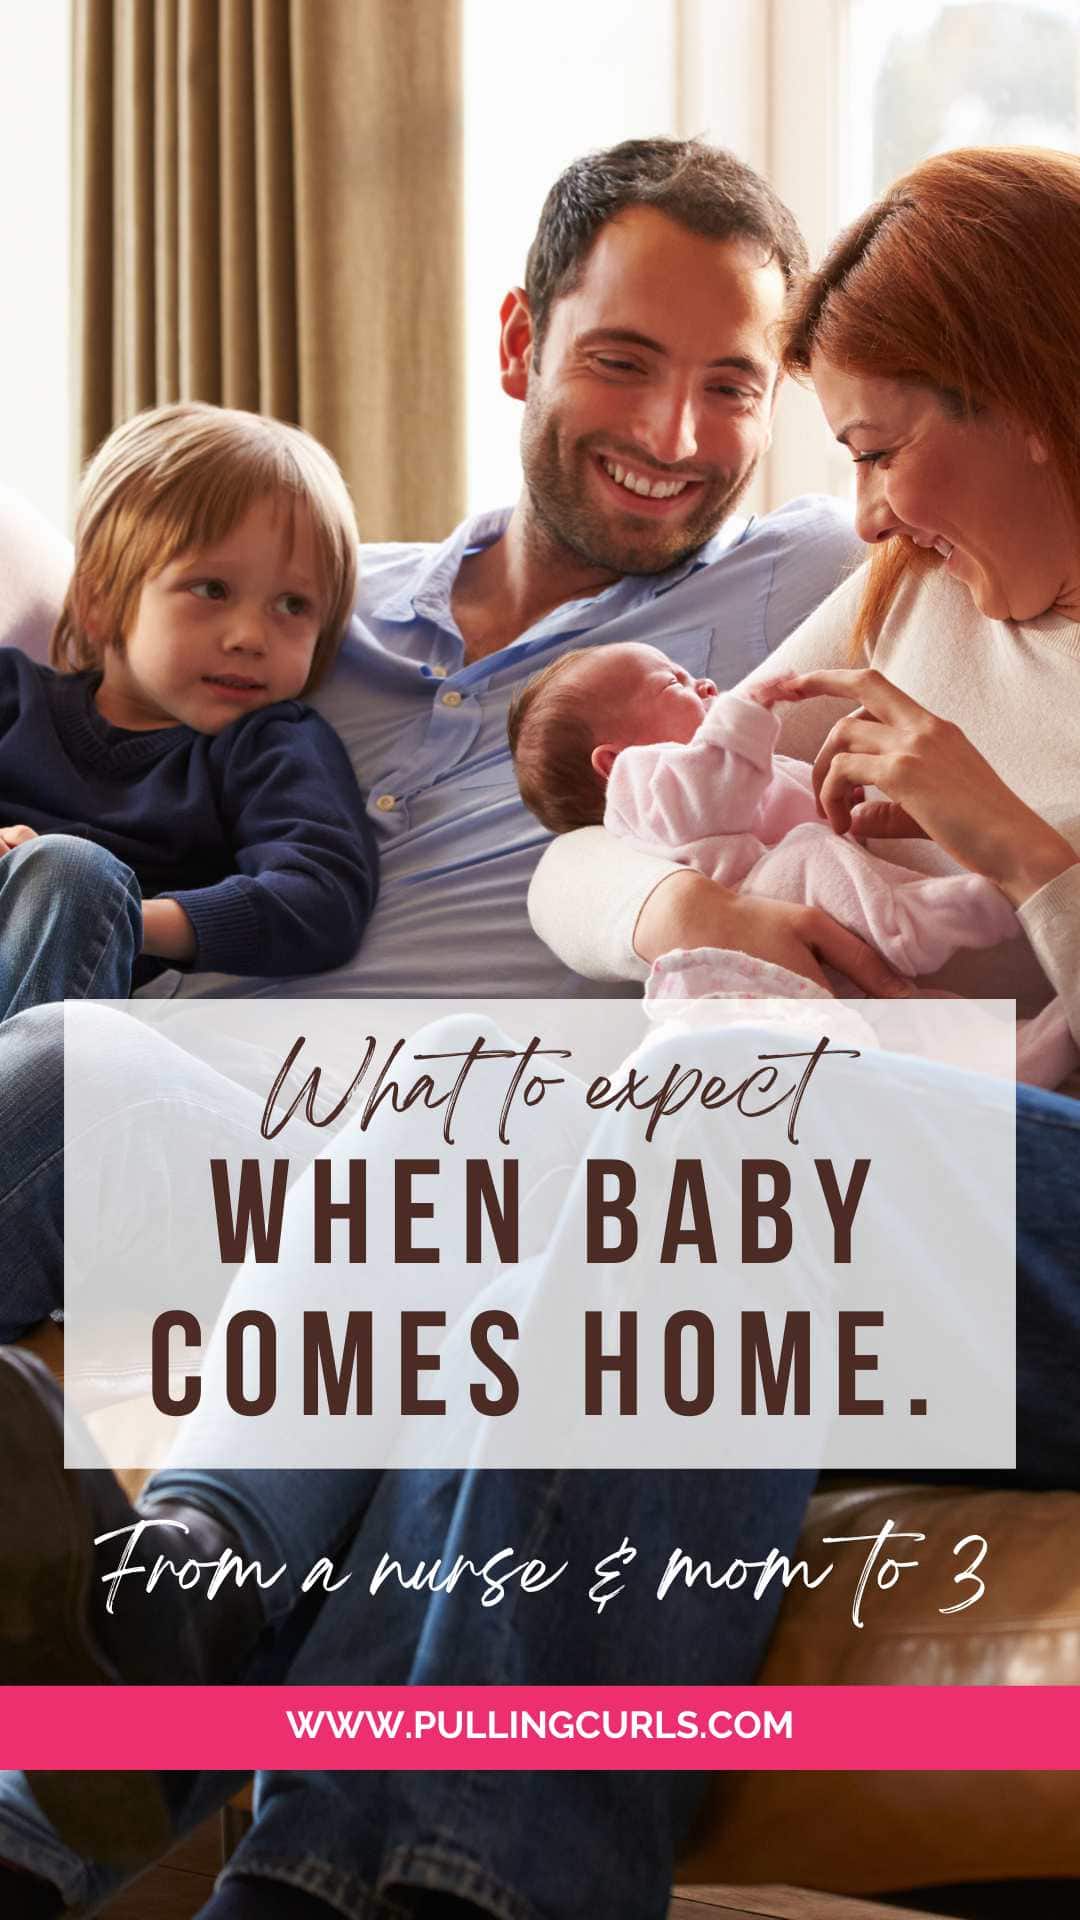 Blogger Hilary shares her personal experience of being surprised by how different it was when she went home with her new baby. This post is a helpful reminder for couples preparing to go home with their little one. It covers everything from sleep deprivation to learning your new normal. via @pullingcurls